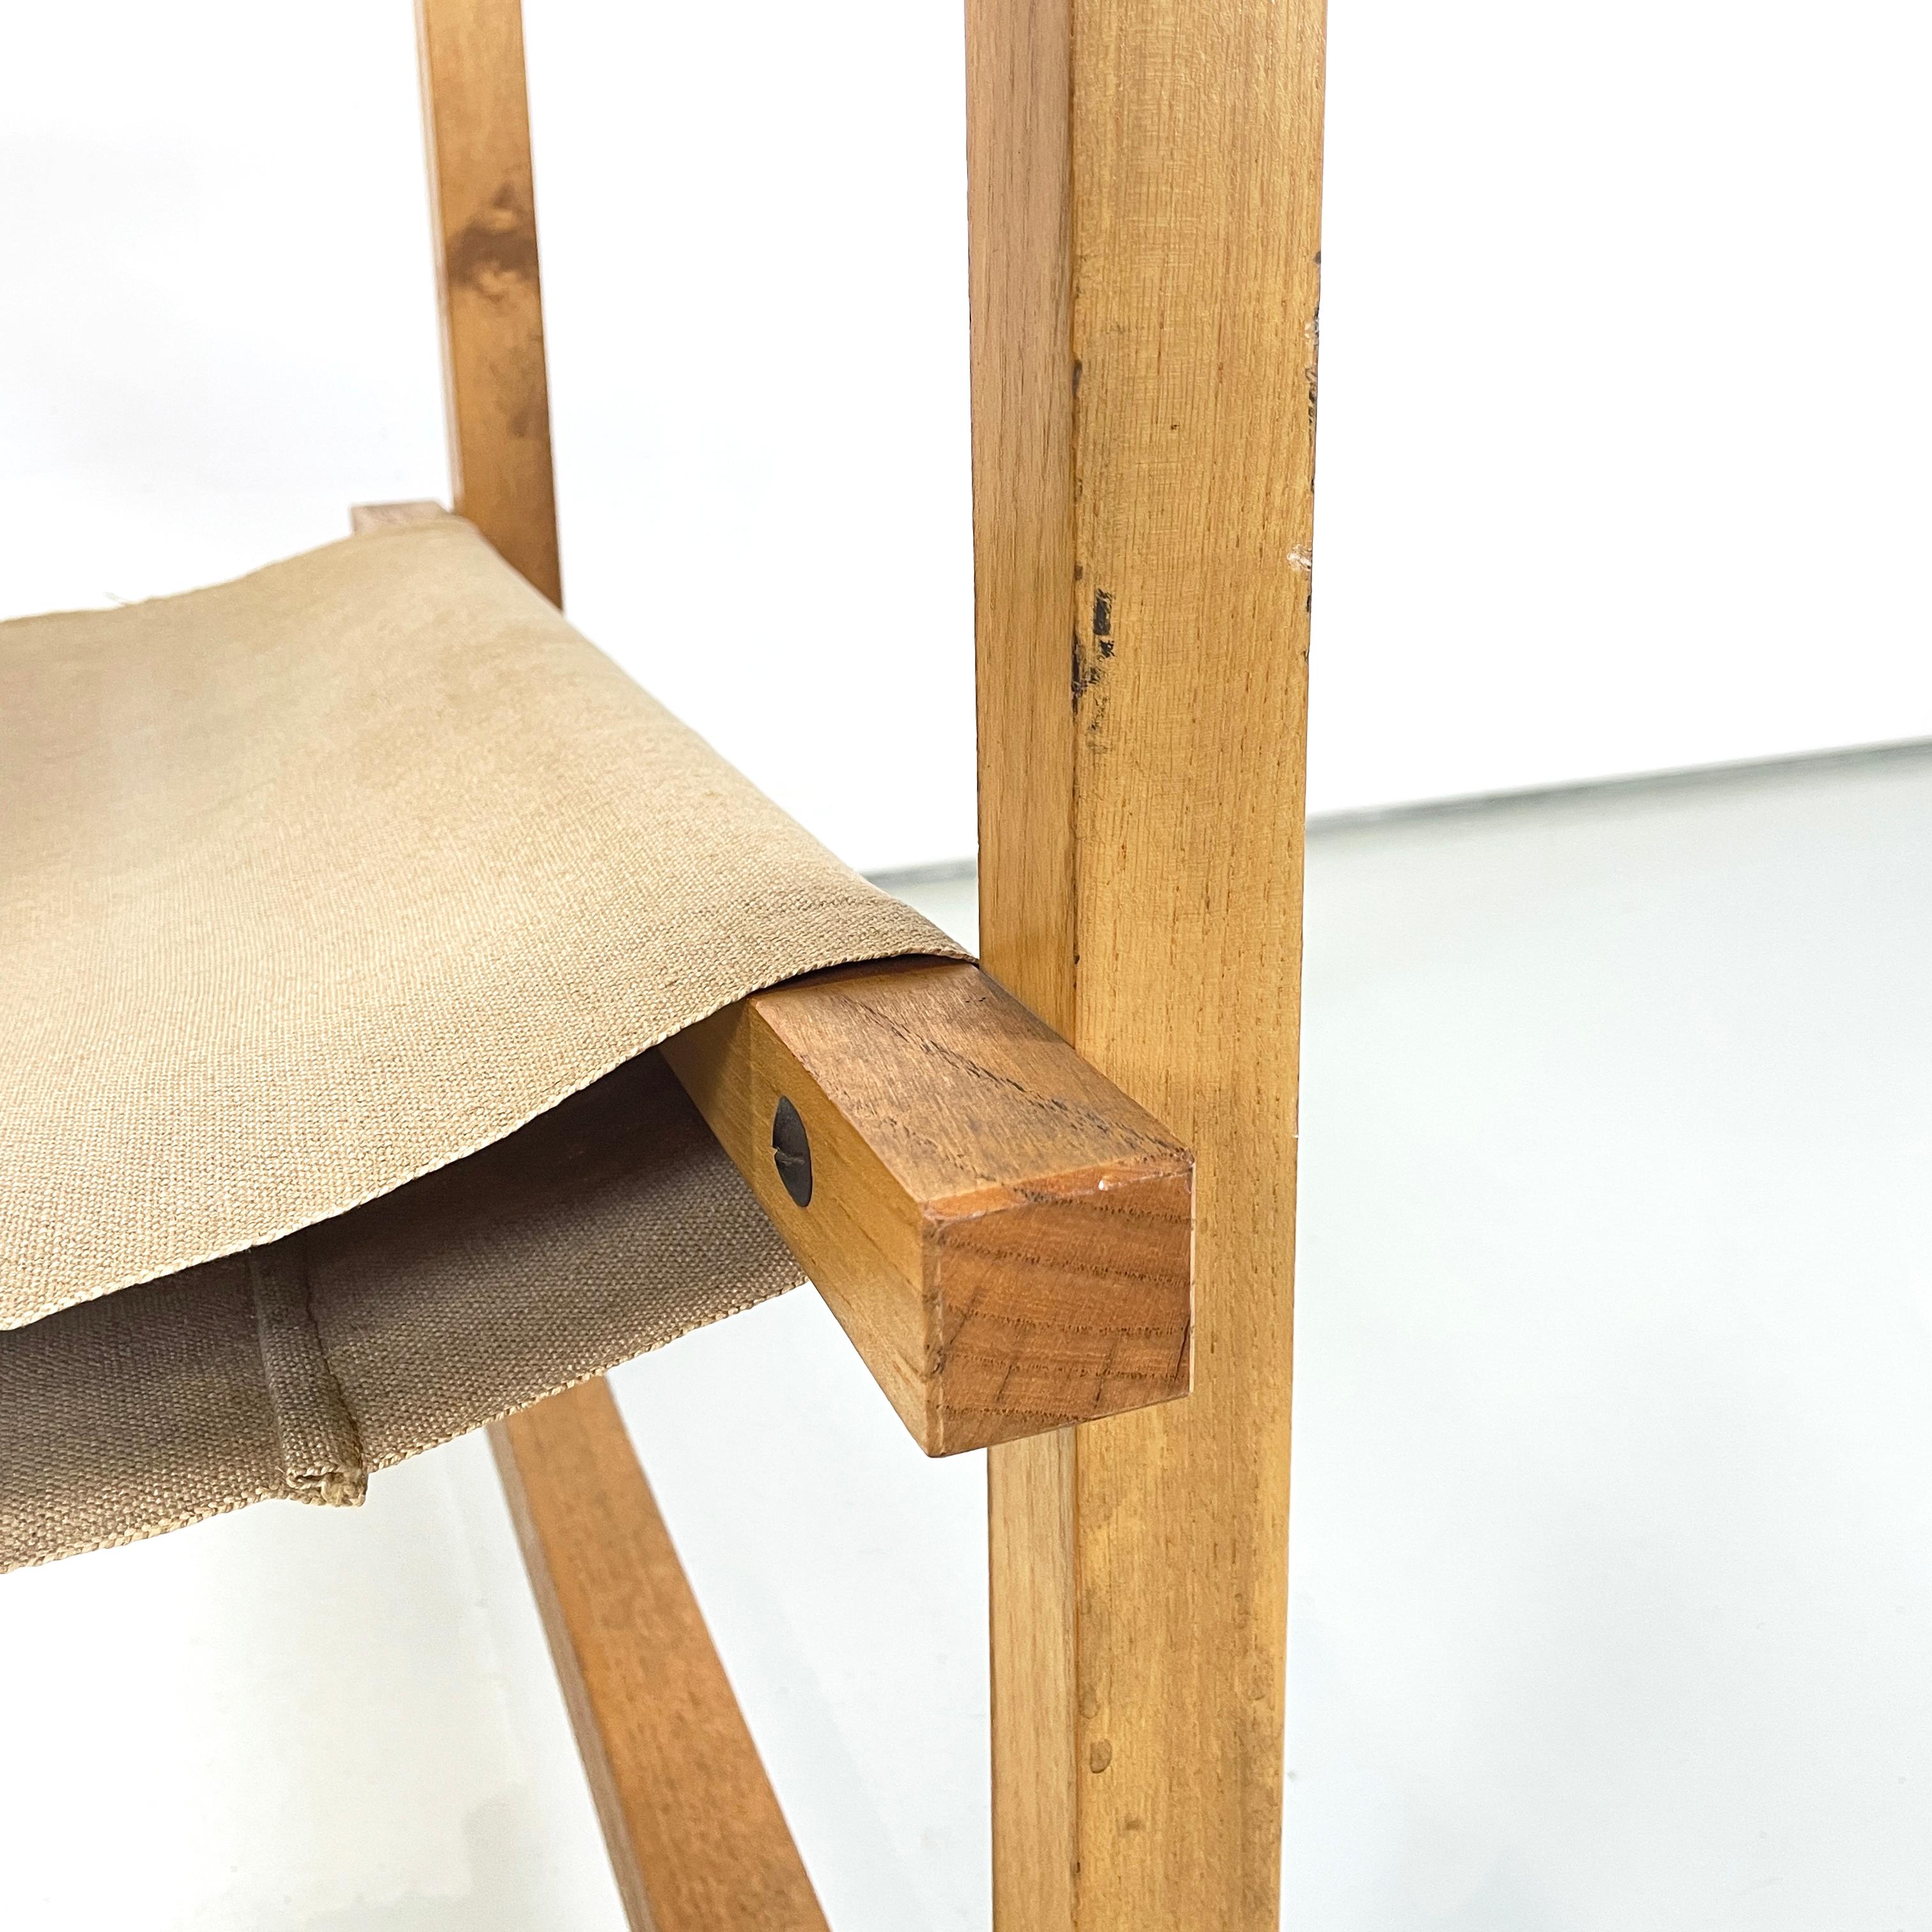 Italian mid-century modern Wood armchair with beige fabric by Pino Pedano, 1970s For Sale 6